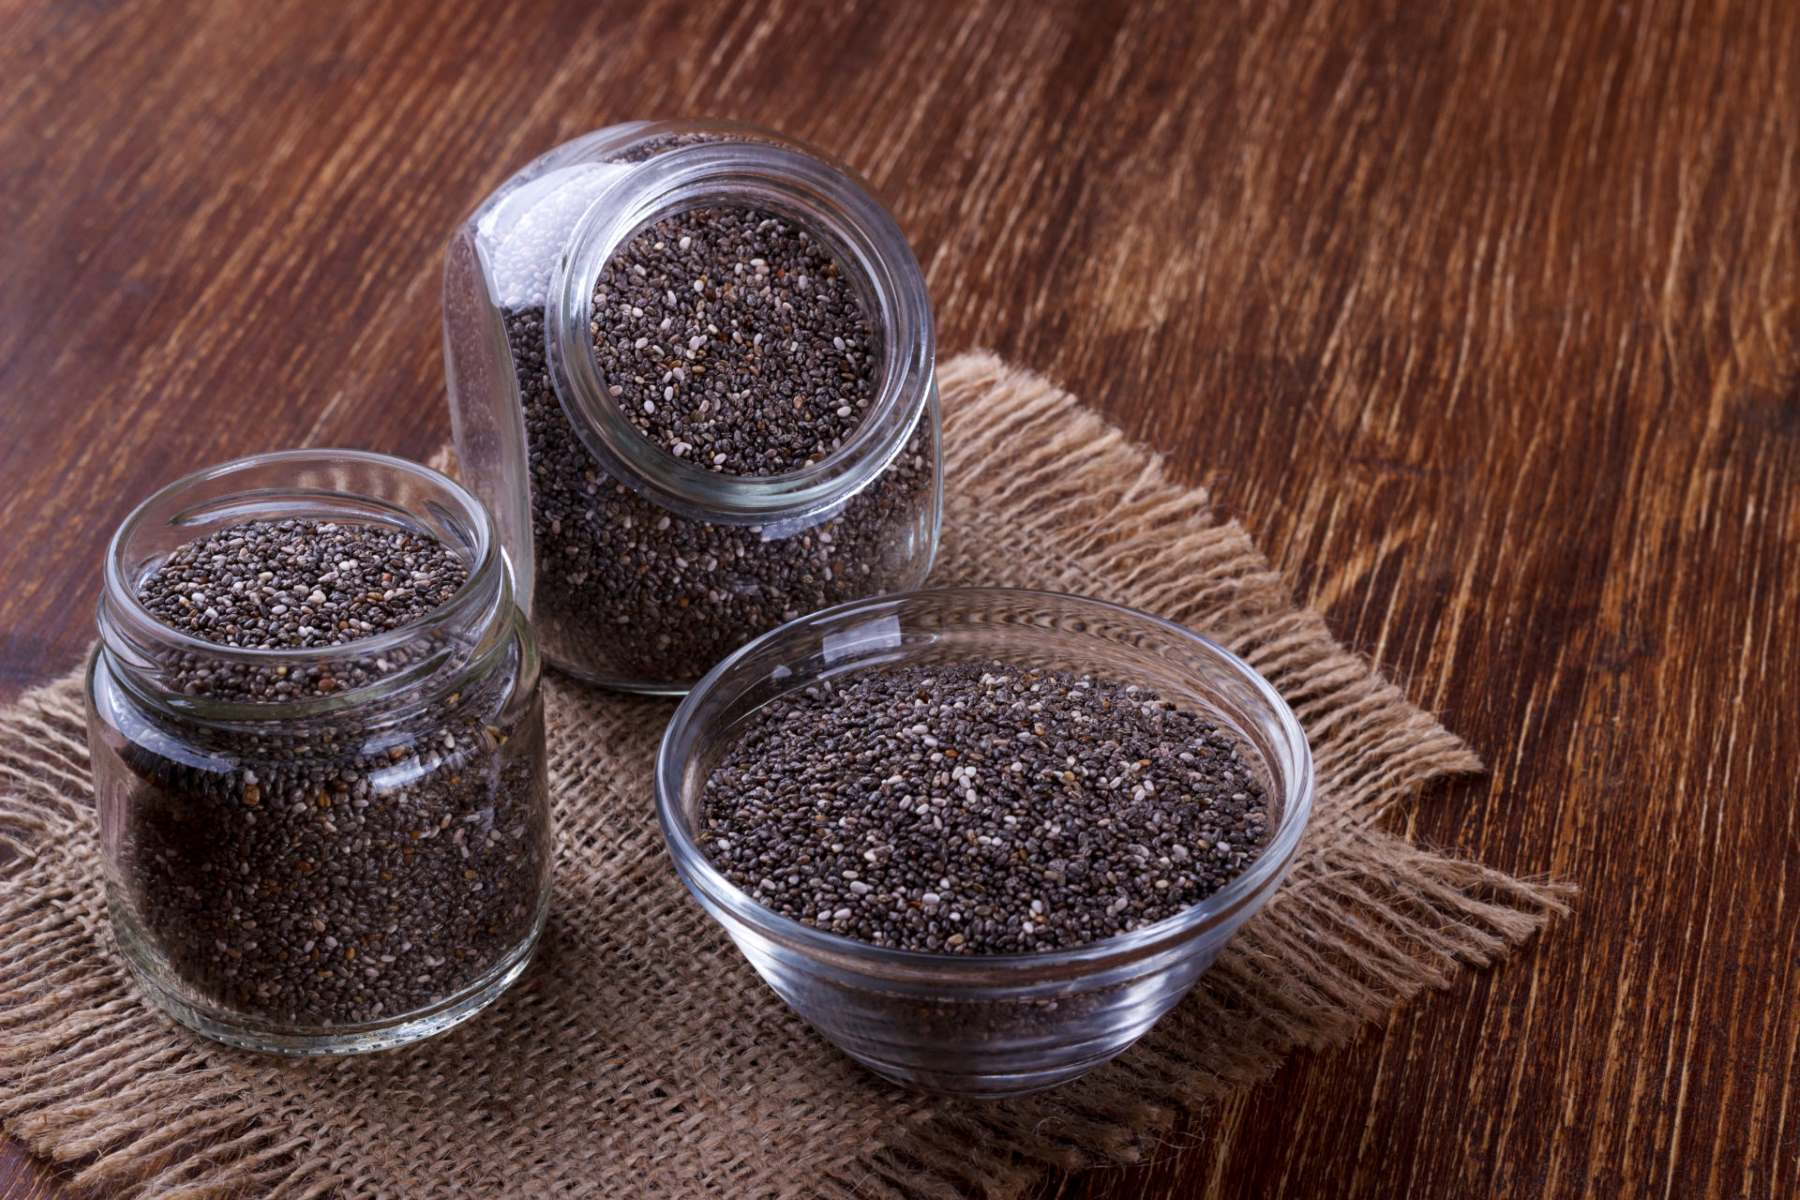 How To Get Rid Of Bloating From Chia Seeds